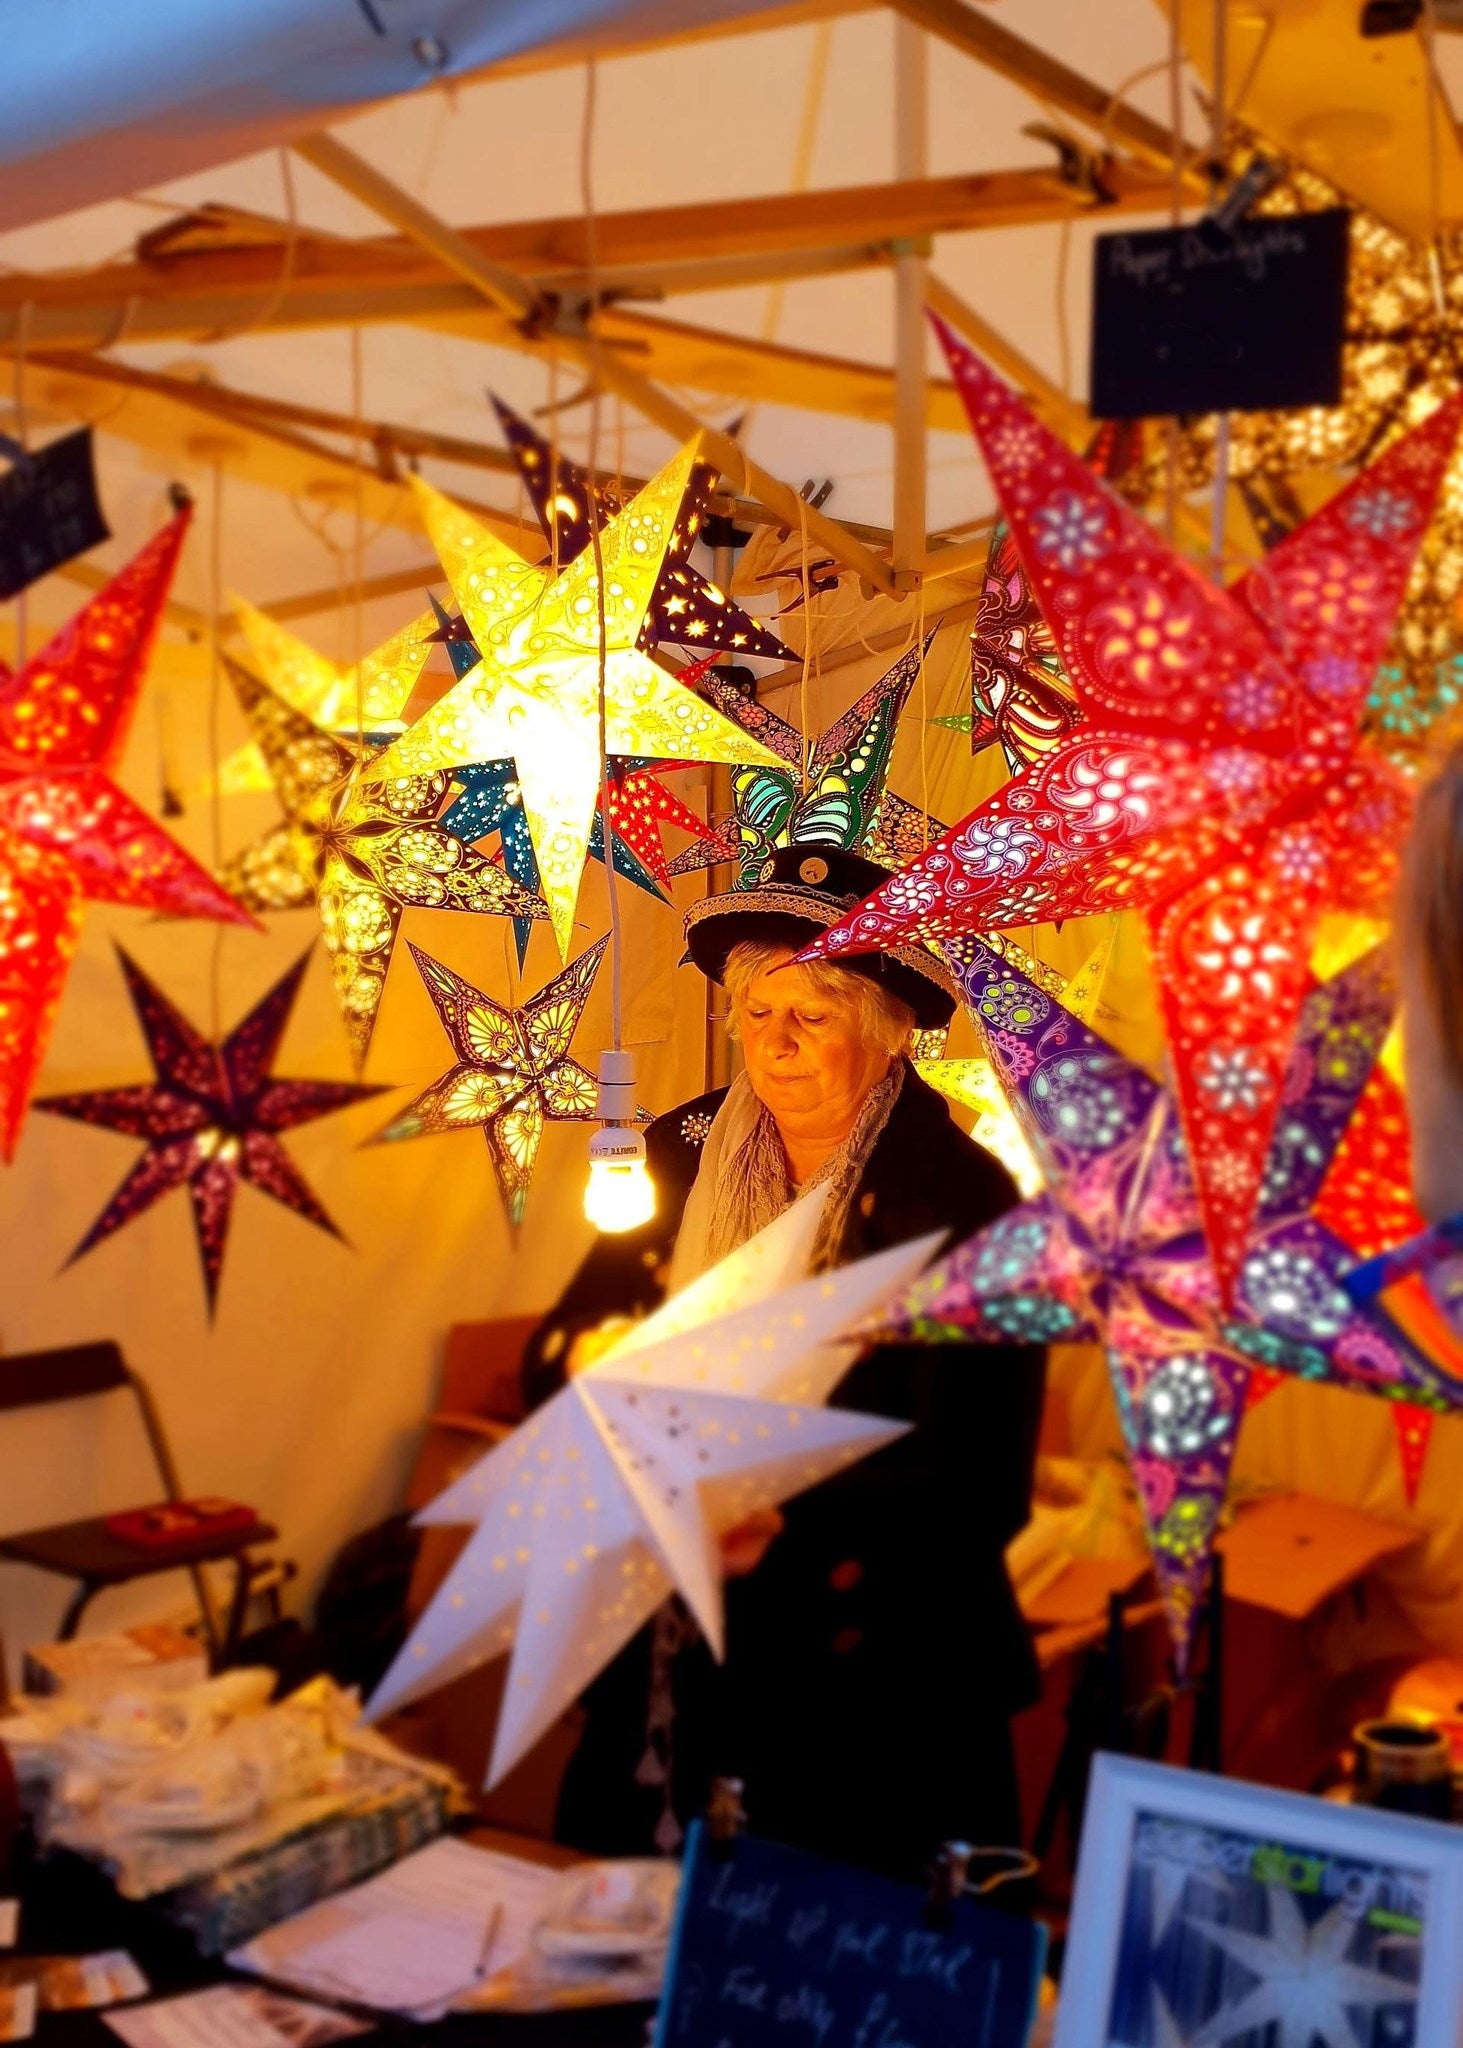 Goodbye Lincoln Christmas Market: Paper Starlights' Emotional Farewell After 27 Years